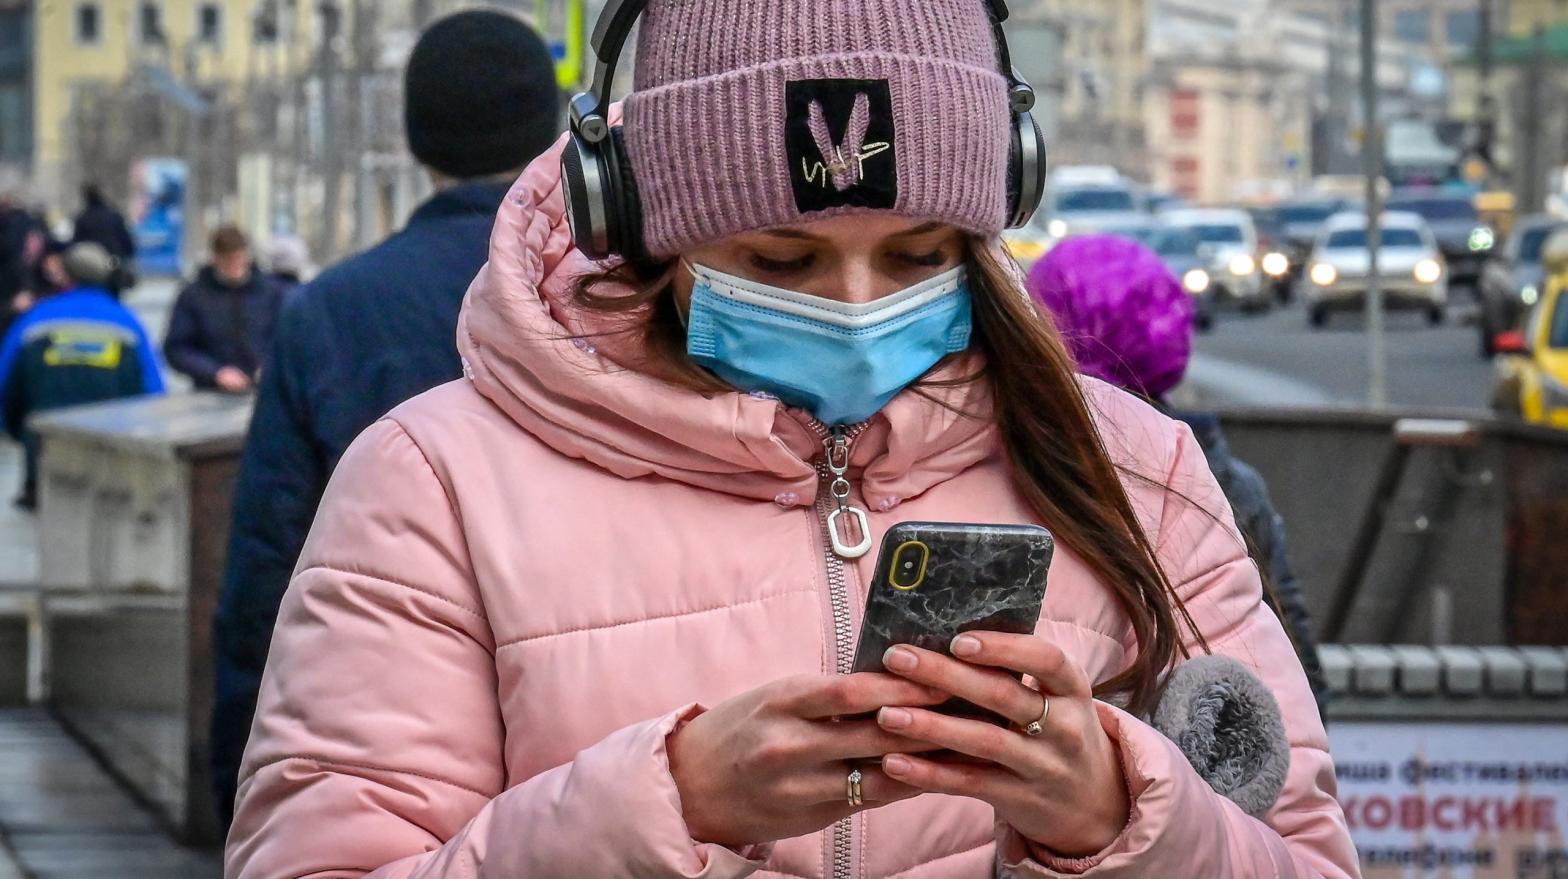 A woman wearing a face mask to protect against the coronavirus disease uses her smartphone walking on a street in Moscow on March 19, 2021.  (Photo: Yuri Kadobnov, Getty Images)